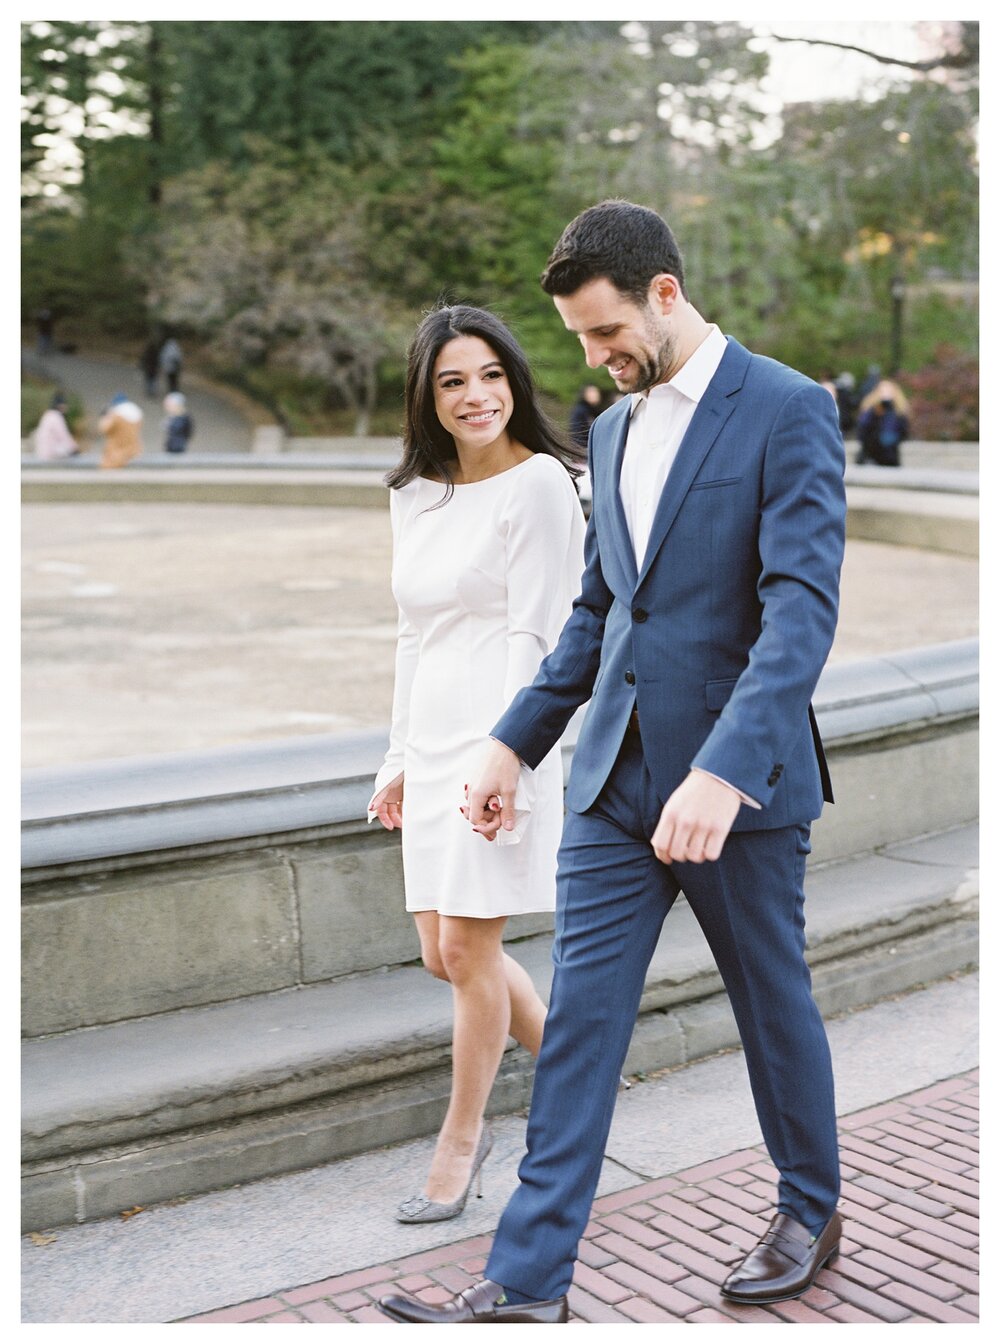  engagement session in central park, engagement photos in central park, engagement photos outfits, 